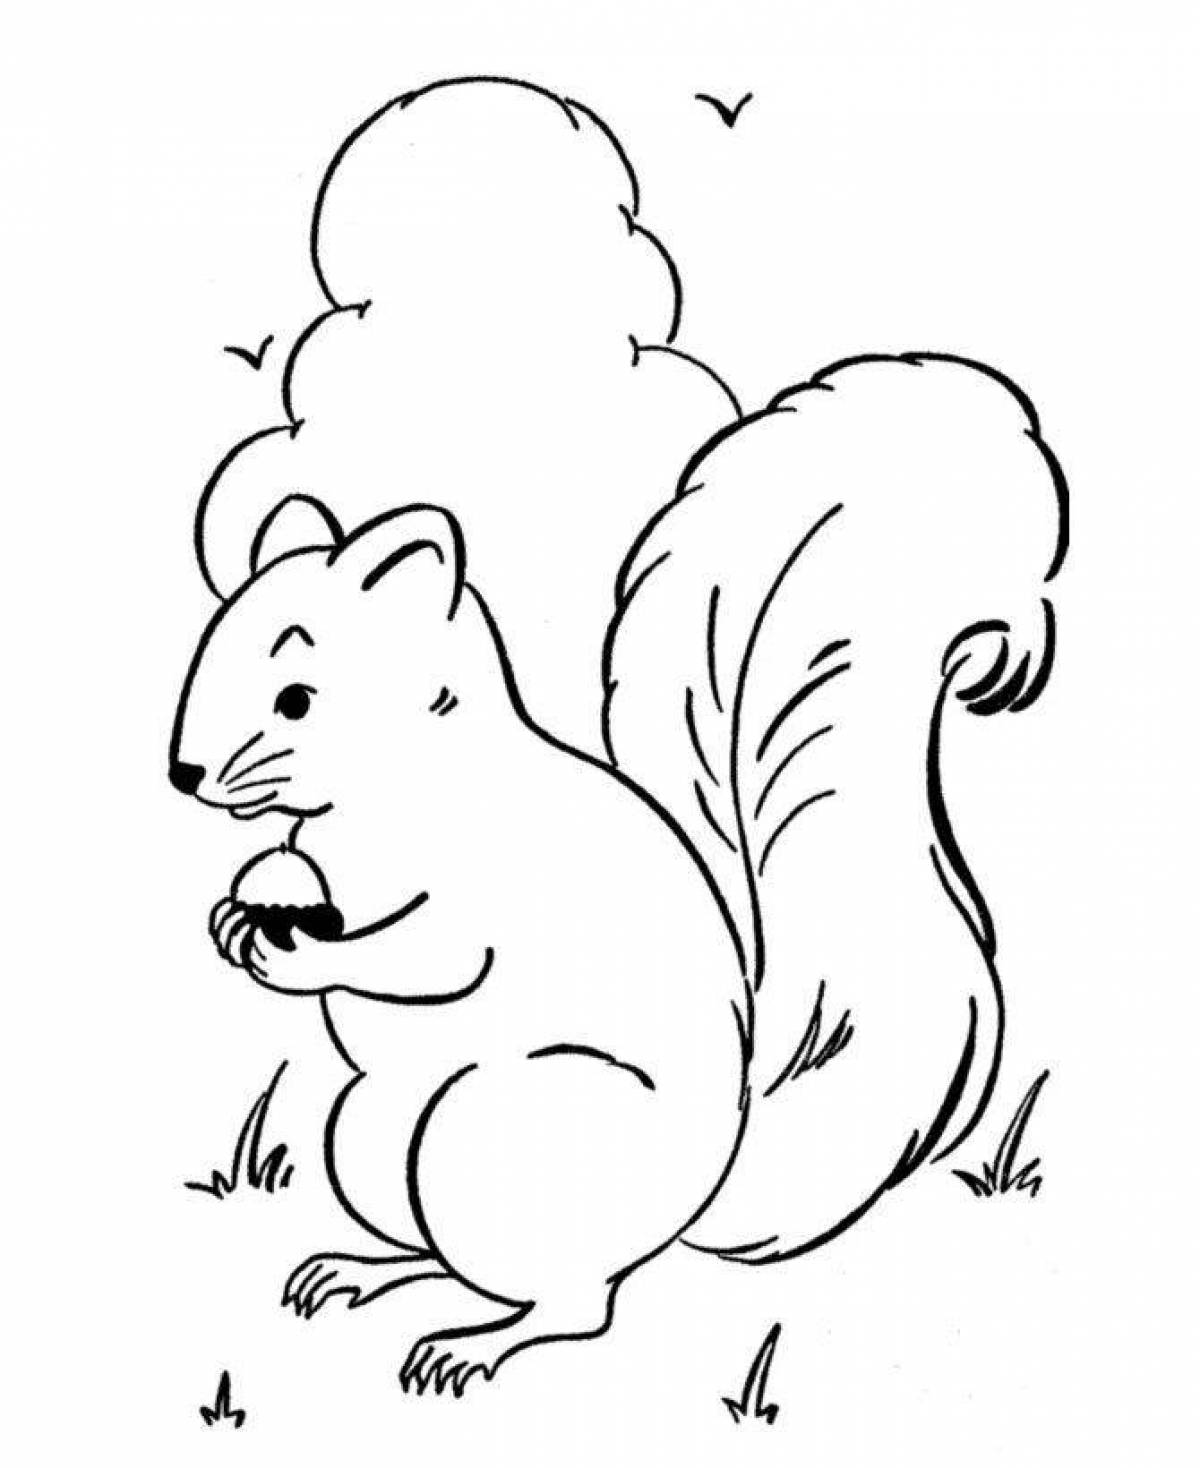 Playful coloring squirrel drawing